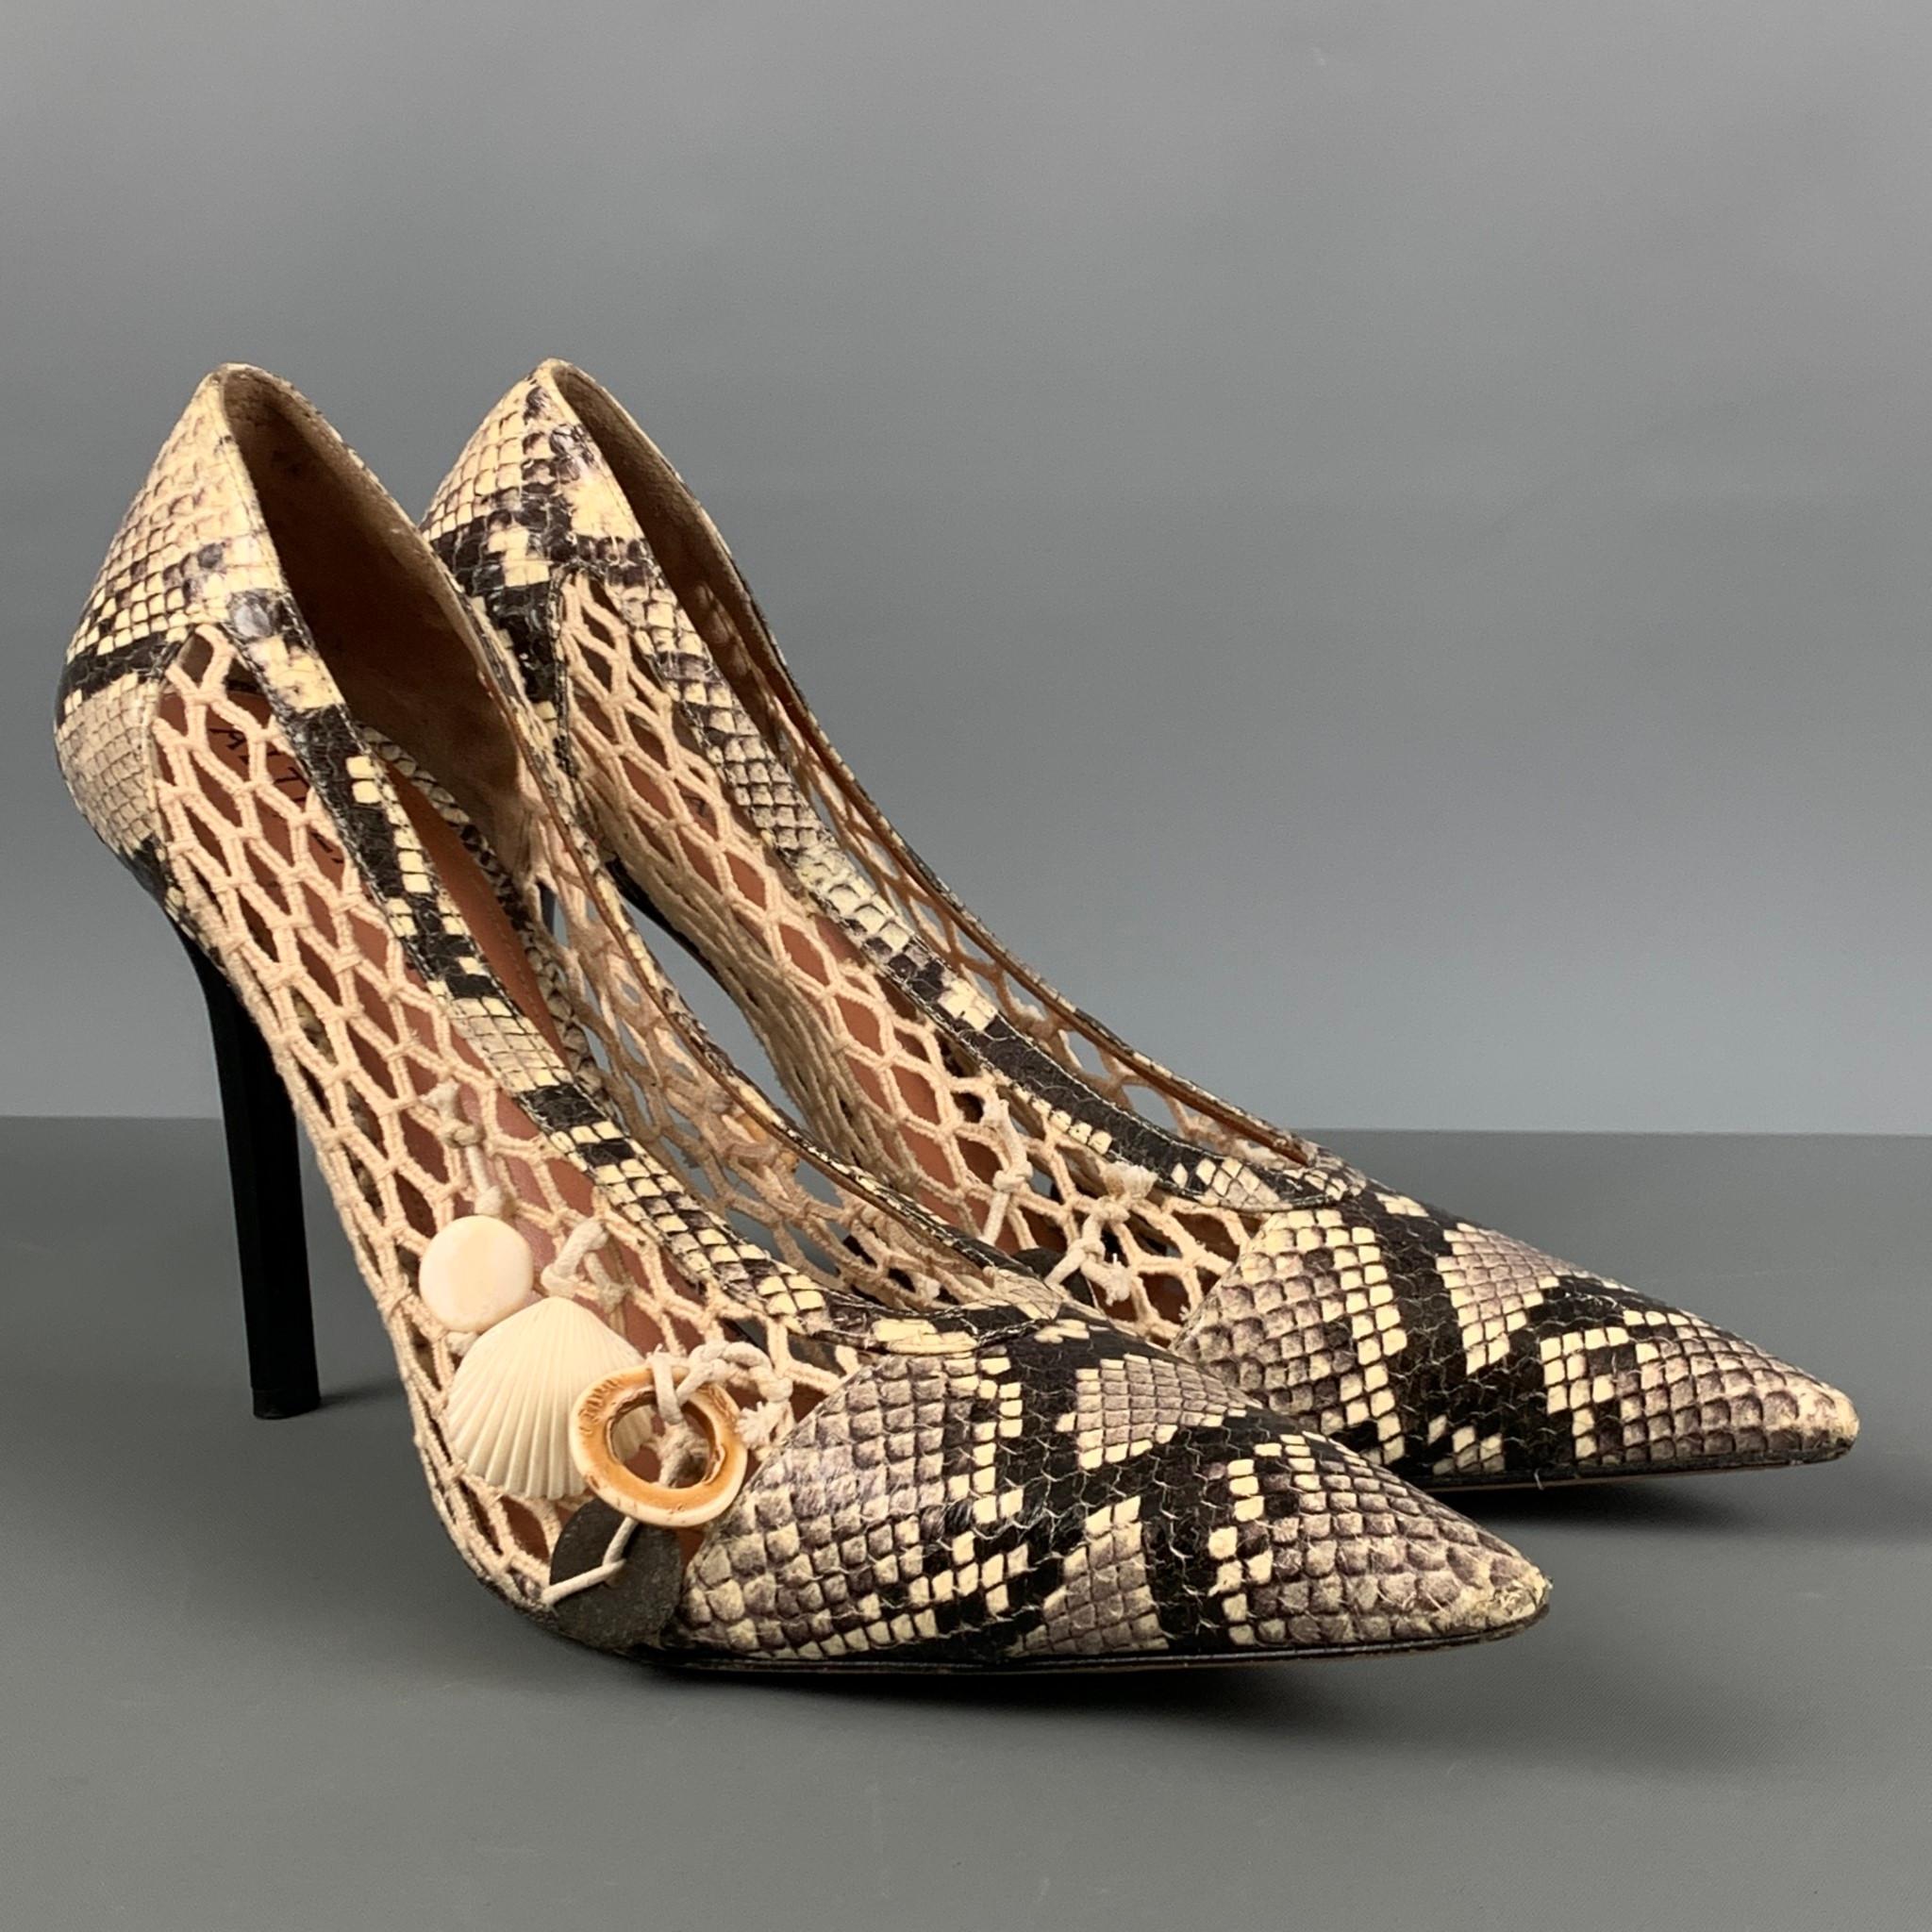 ALTUZARRA pumps comes in a beige and grey snake skin featuring a beige mesh detail, sea shells, pointed toe, and a stiletto heel. Made in Italy.

Very Good Pre-Owned Condition.
Marked: 41

Measurements:

Heel: 4.5 in.

 

SKU: 124568
Category: